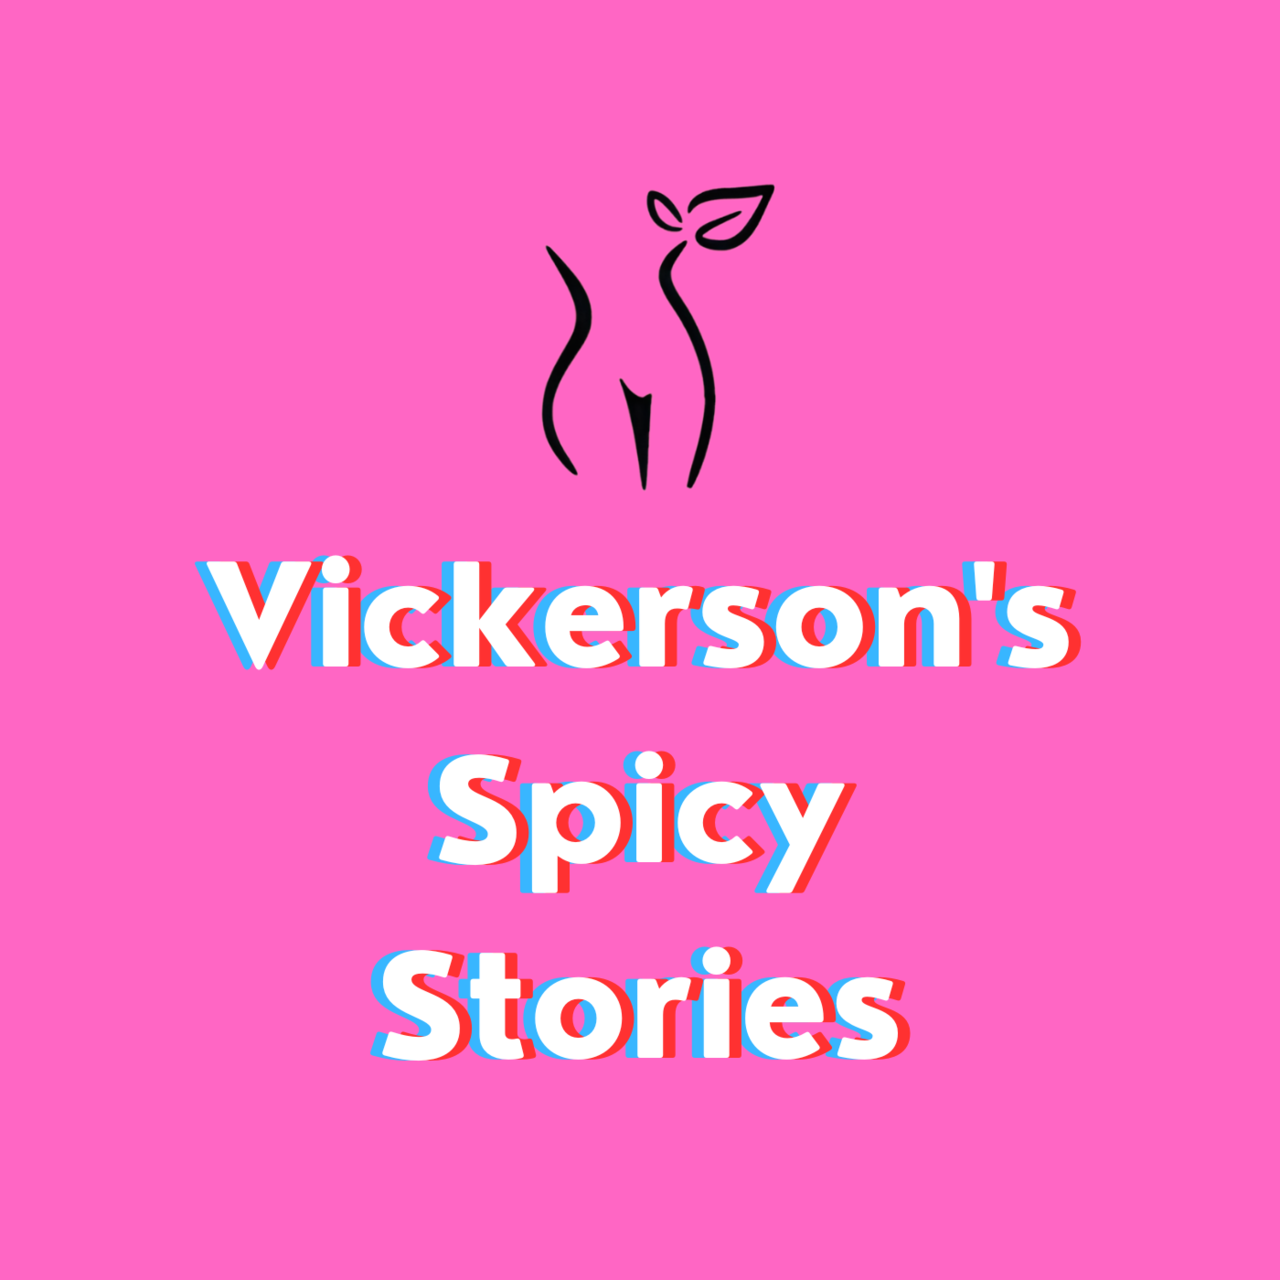 Artwork for Vickerson's Spicy Stories